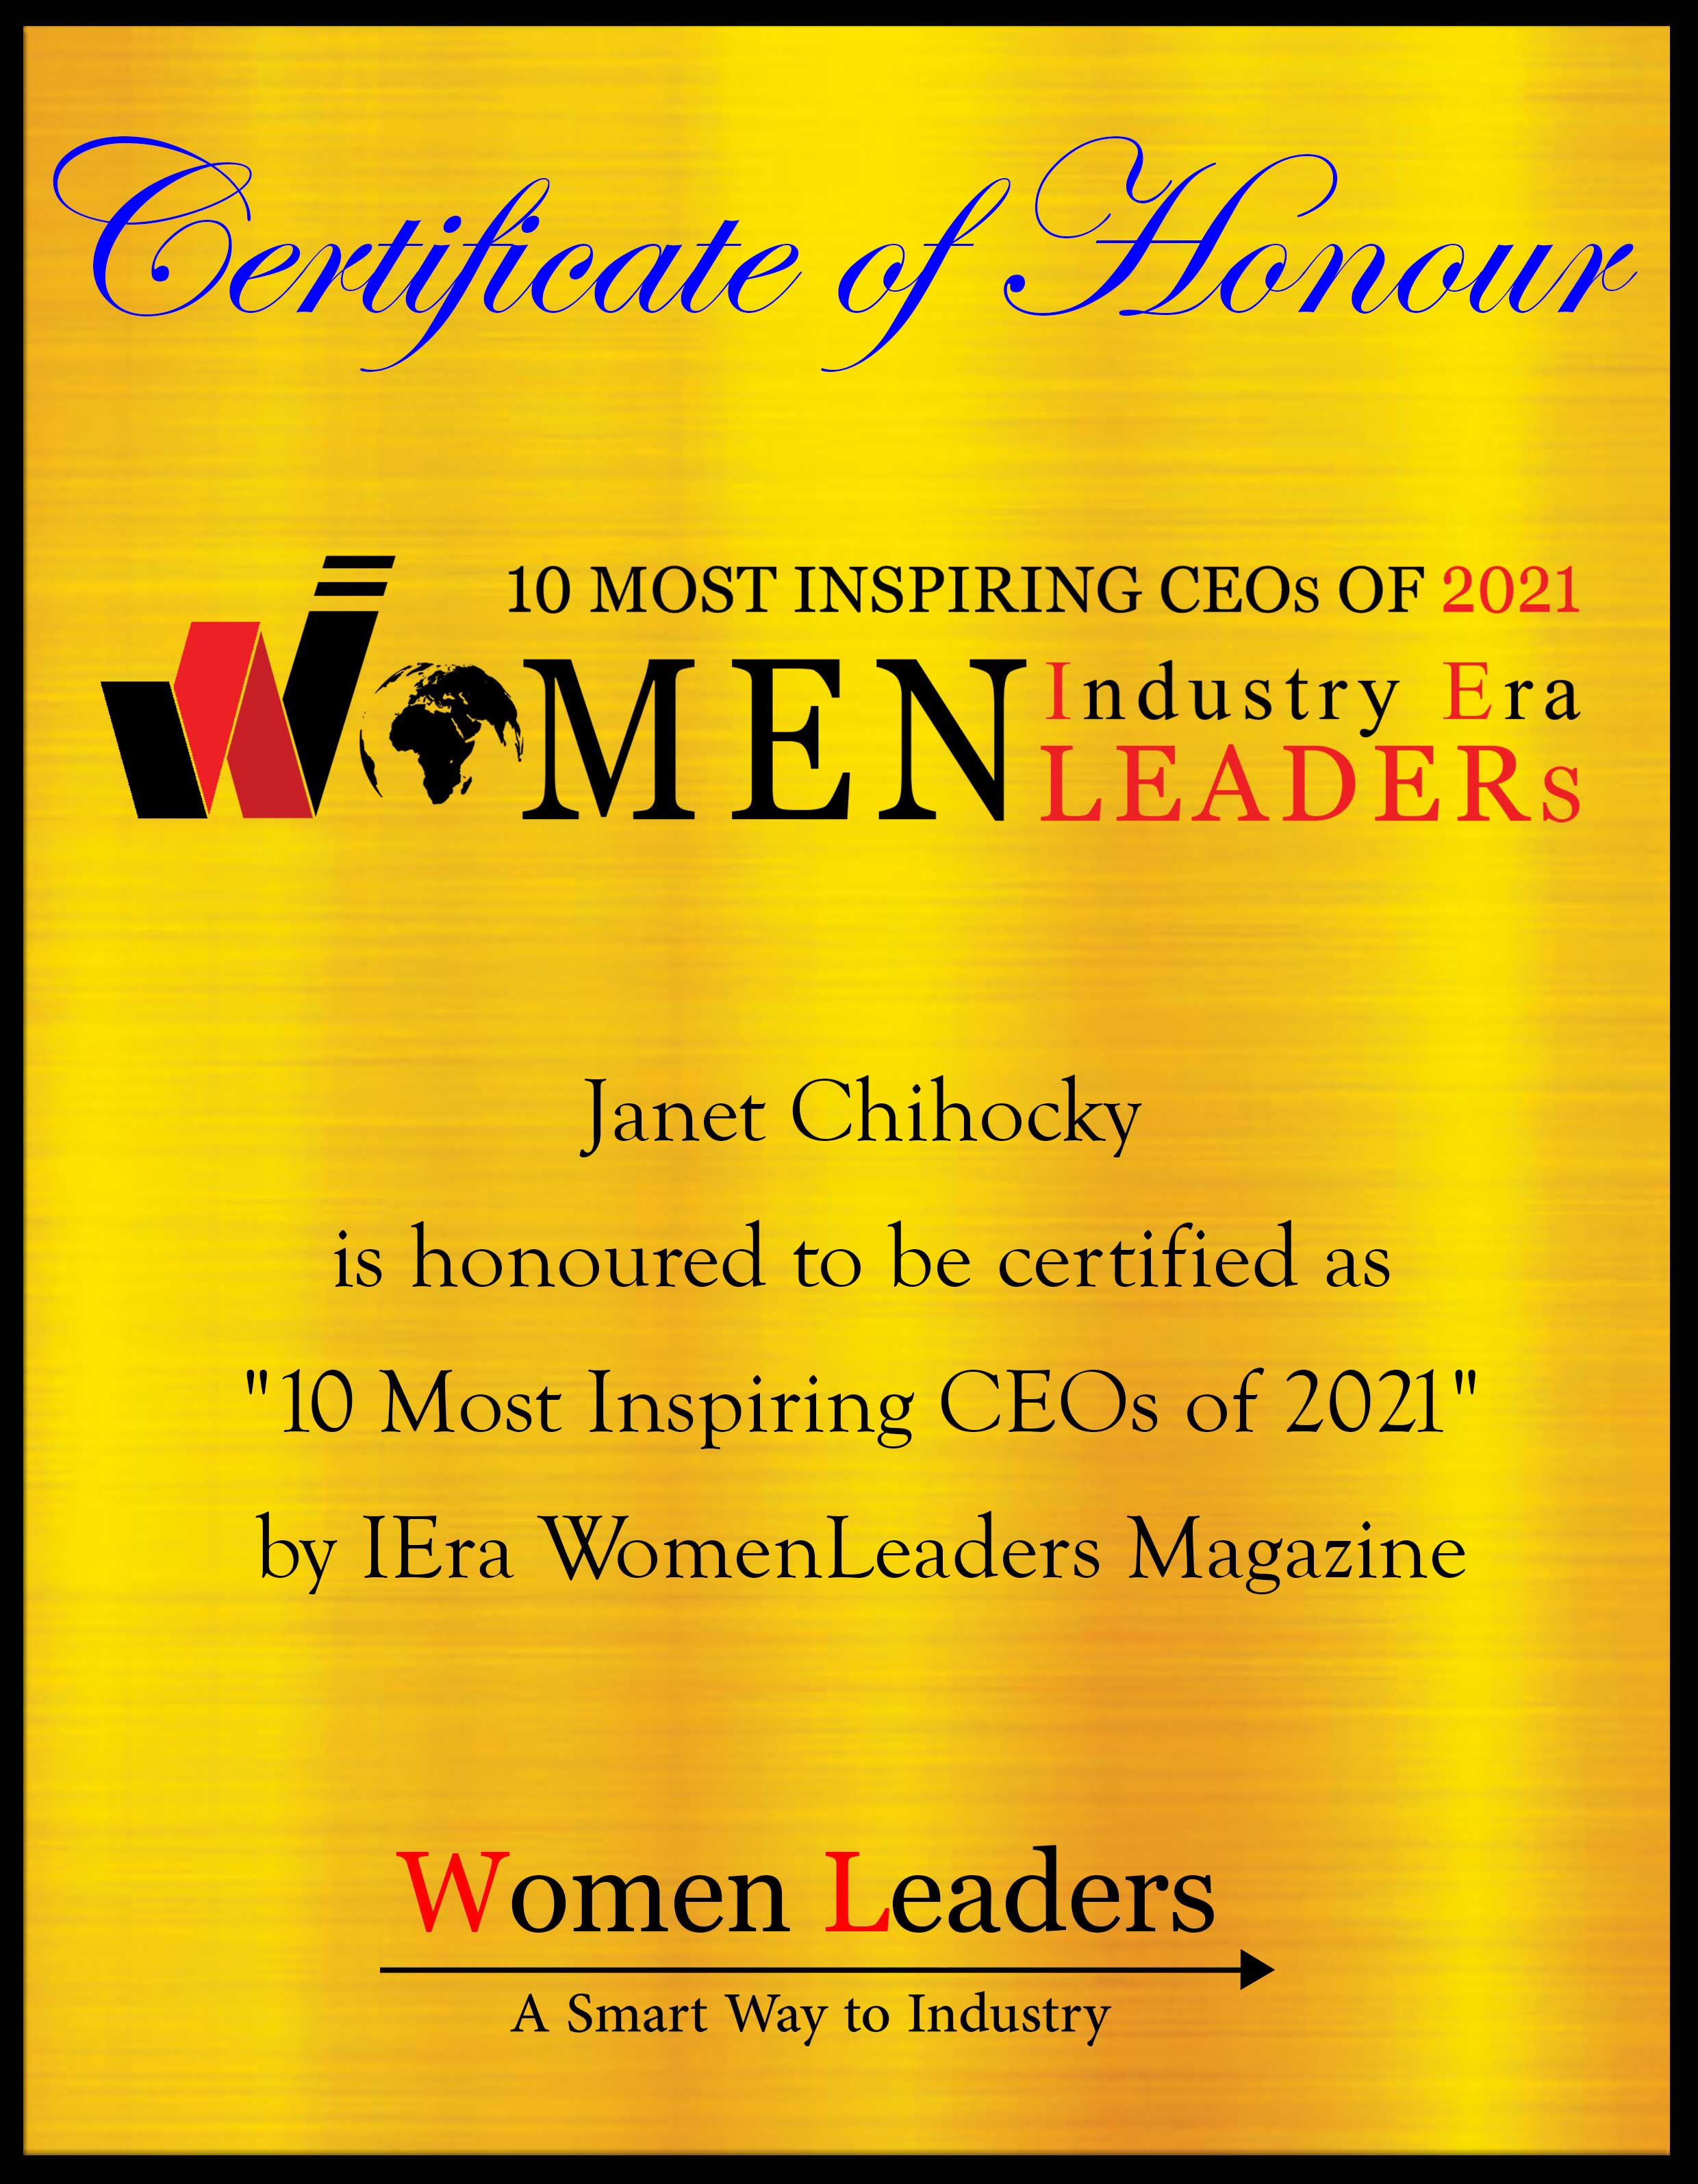 Janet Chihocky, Founder & CEO of JANSON Communications, Most Inspiring CEOs of 2021